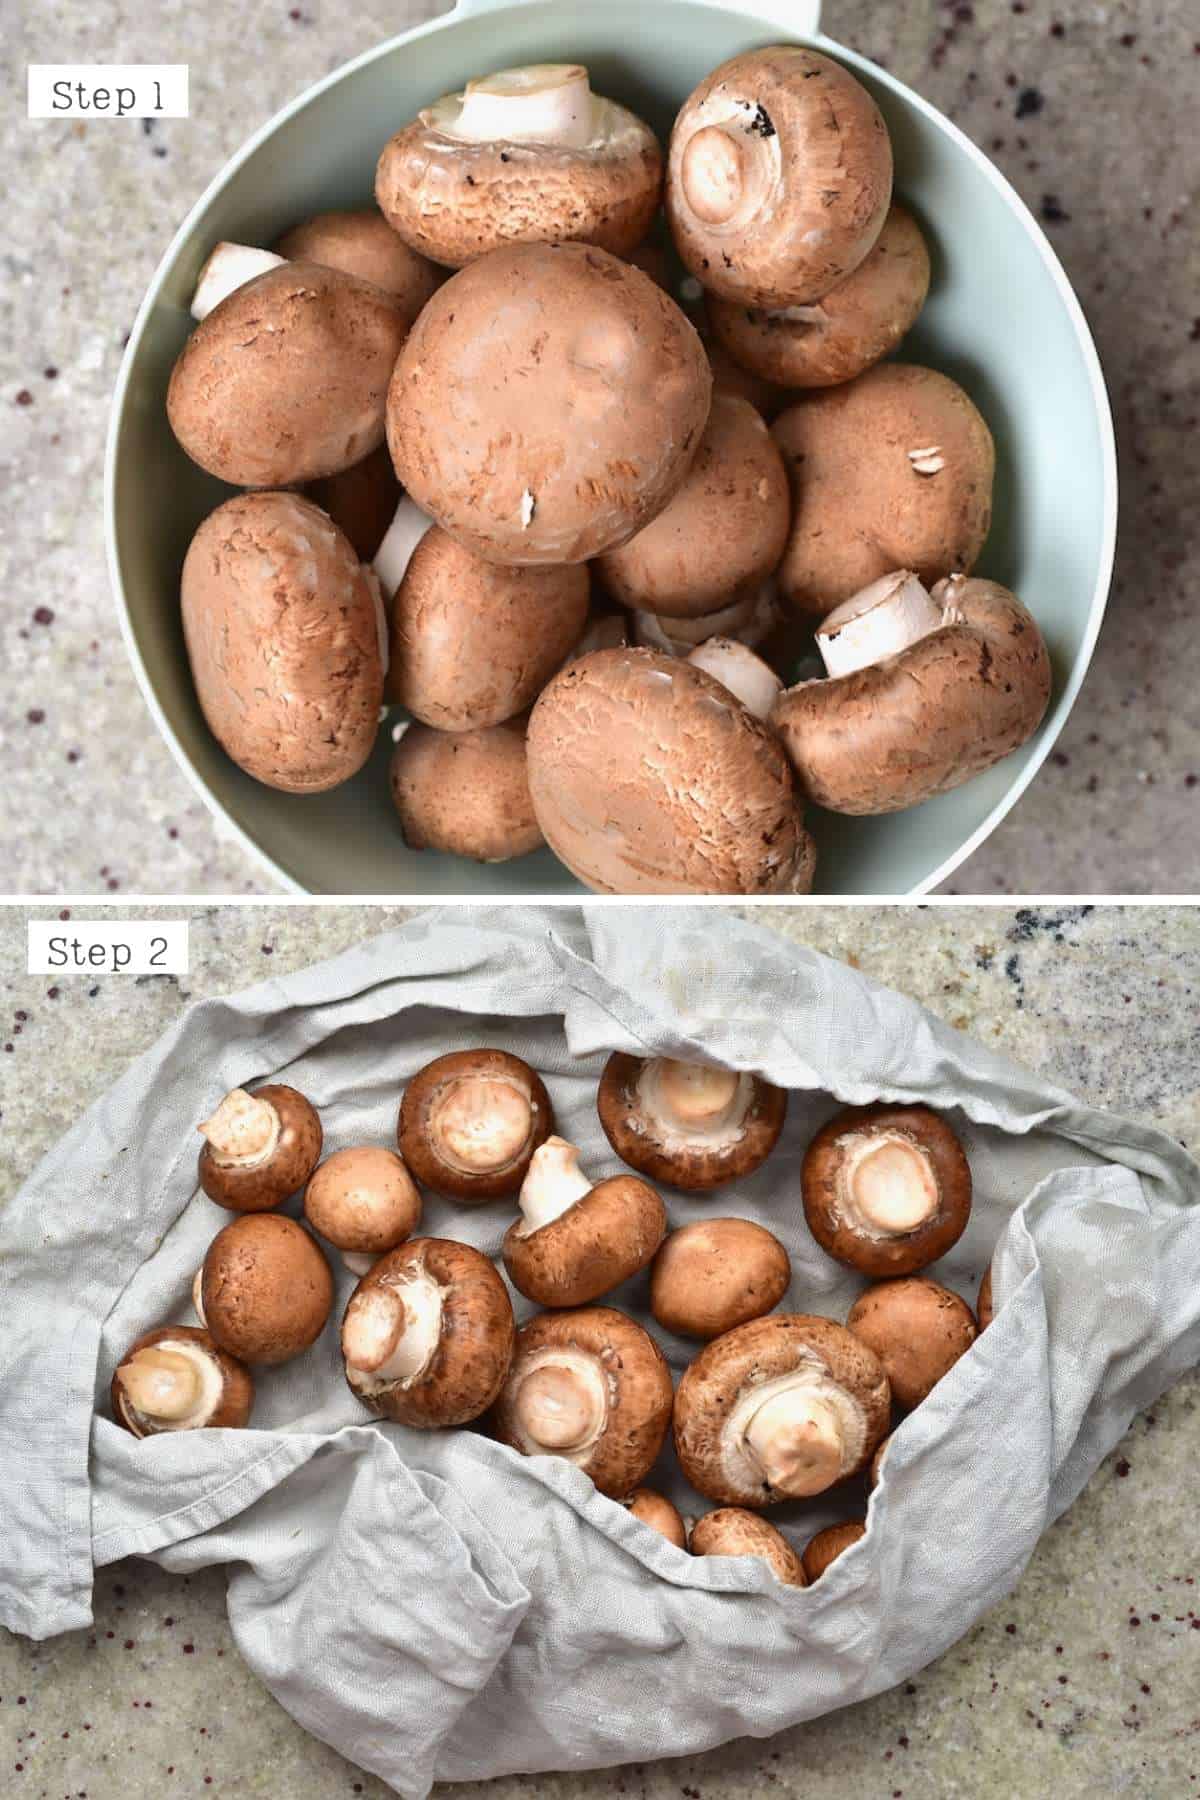 How to Dry Mushrooms 4 Different Ways